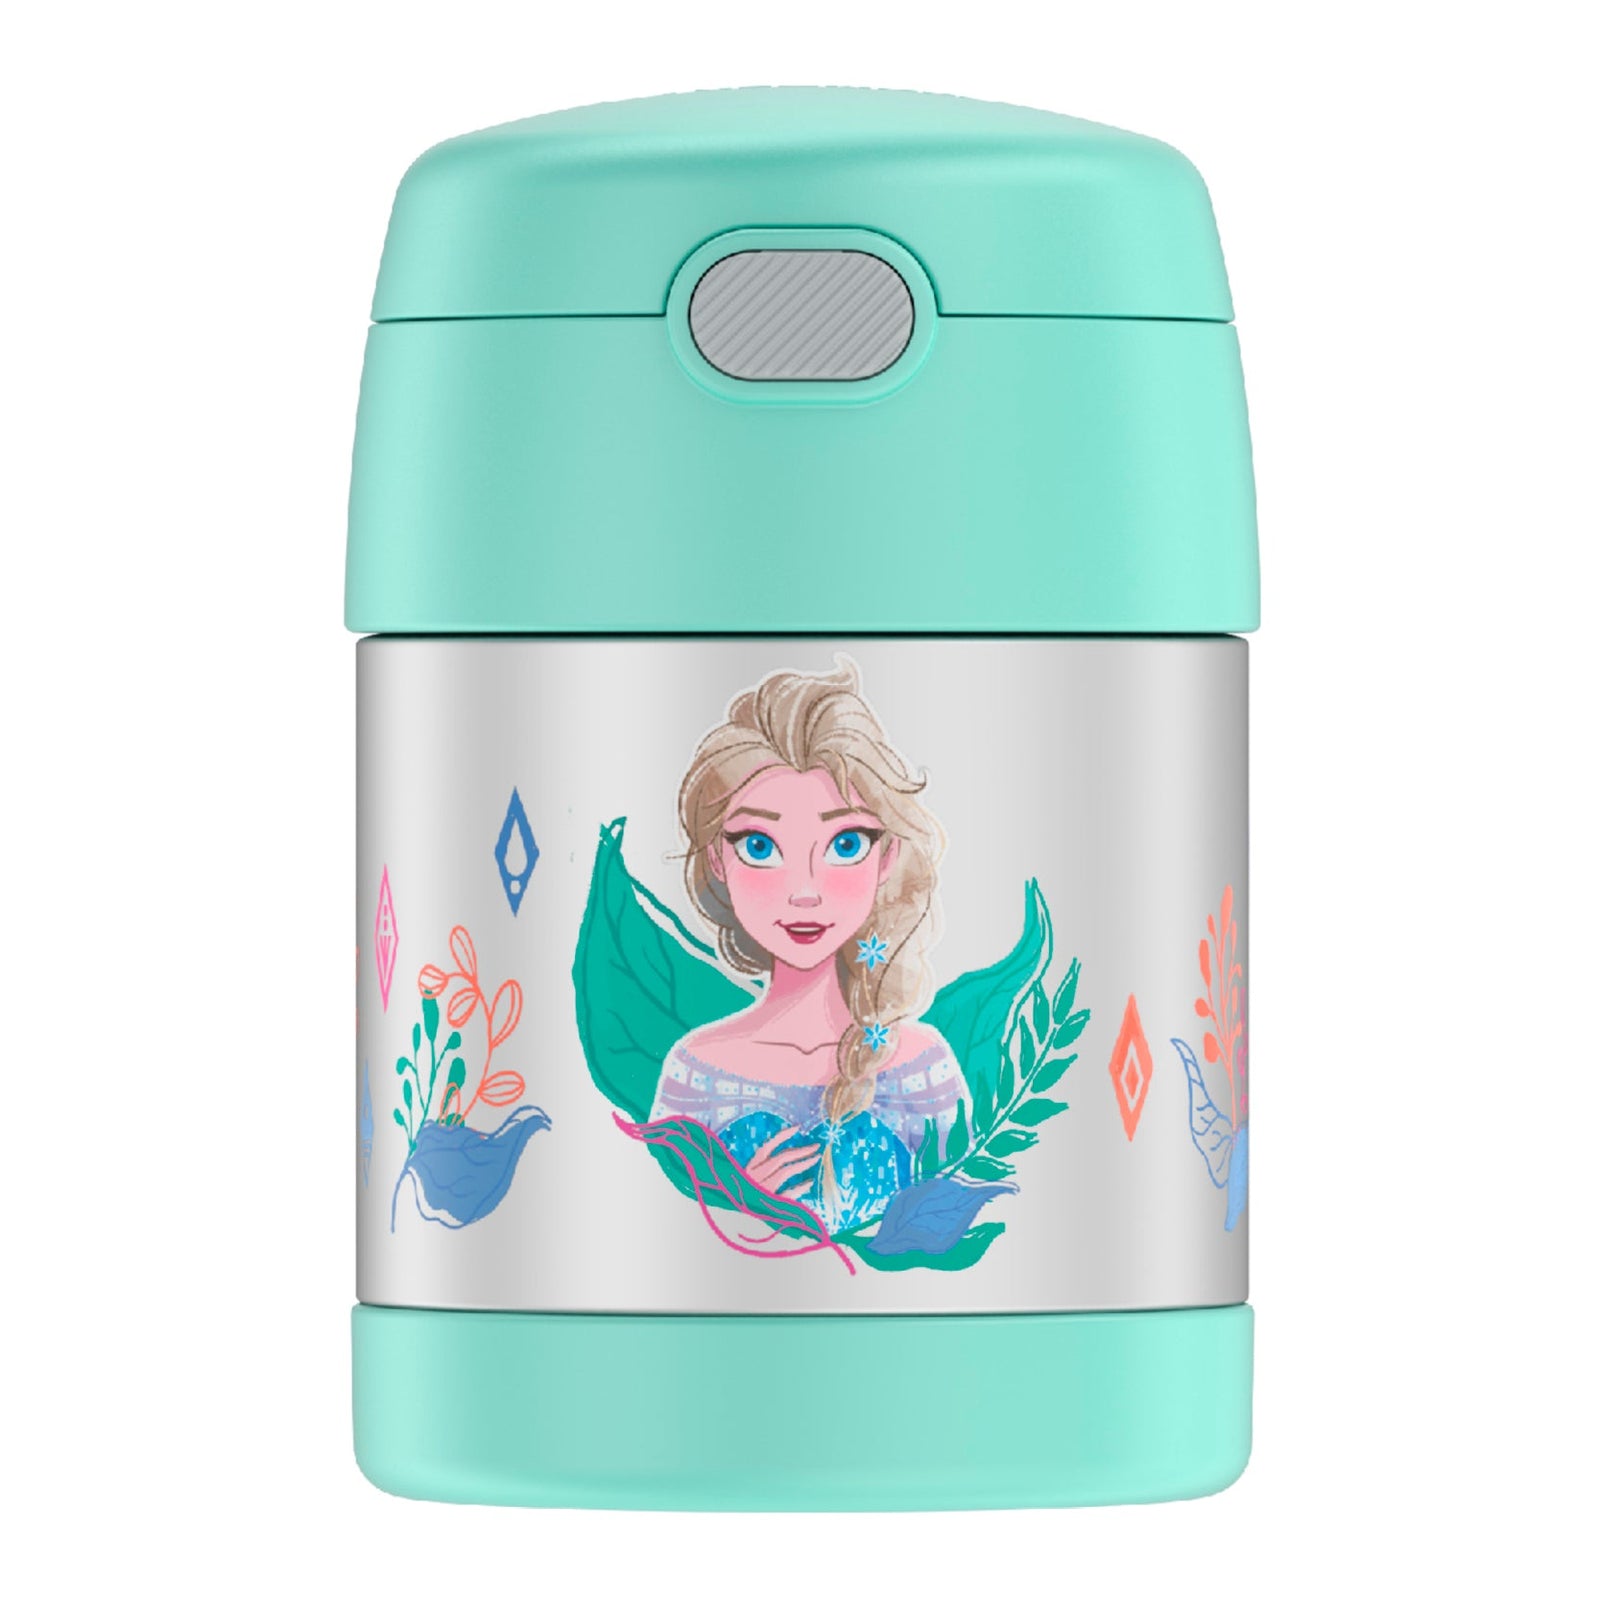 https://cdn.shopify.com/s/files/1/0523/9145/files/thermos-10oz-funtainer-food-jar-with-spoon-frozen-2-mint-thermal-food-jar-thermos-cute-kid-stuff-0_1600x.jpg?v=1682542552